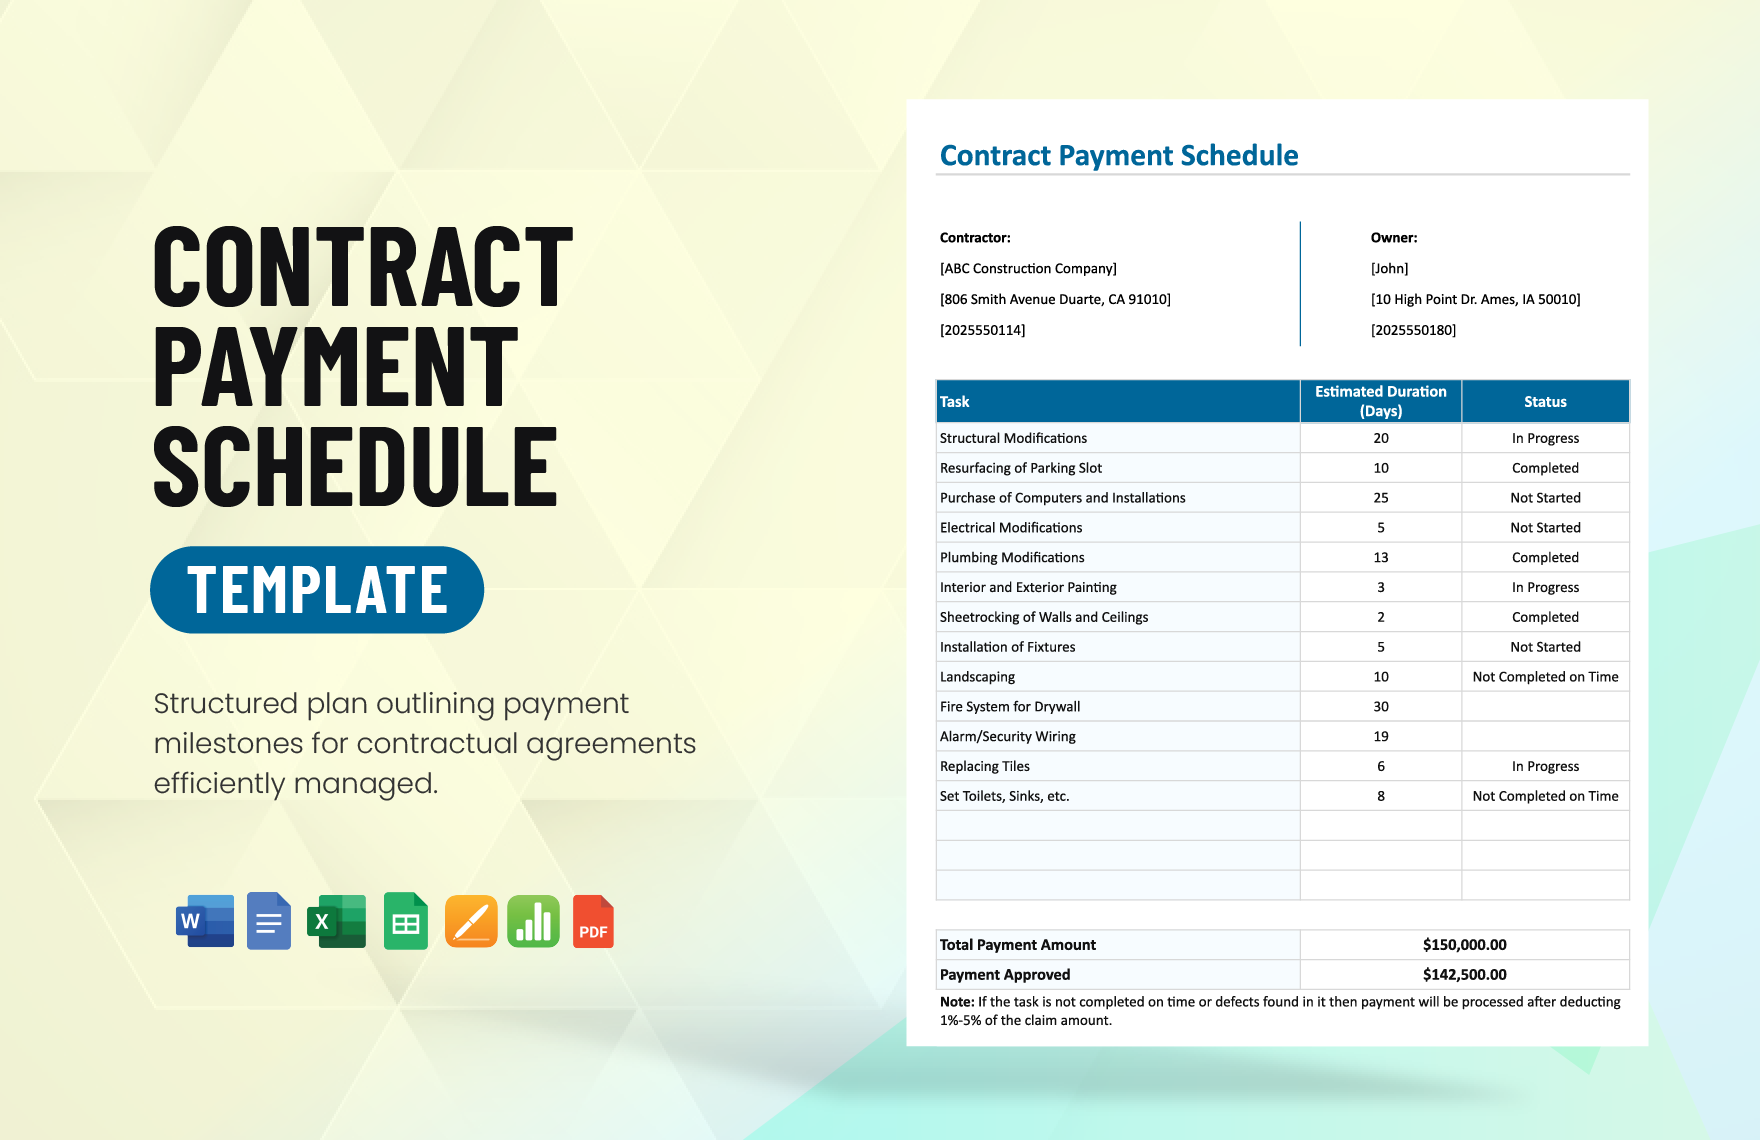 Contract Payment Schedule Template in Word, Google Docs, Excel, PDF, Google Sheets, Apple Pages, Apple Numbers